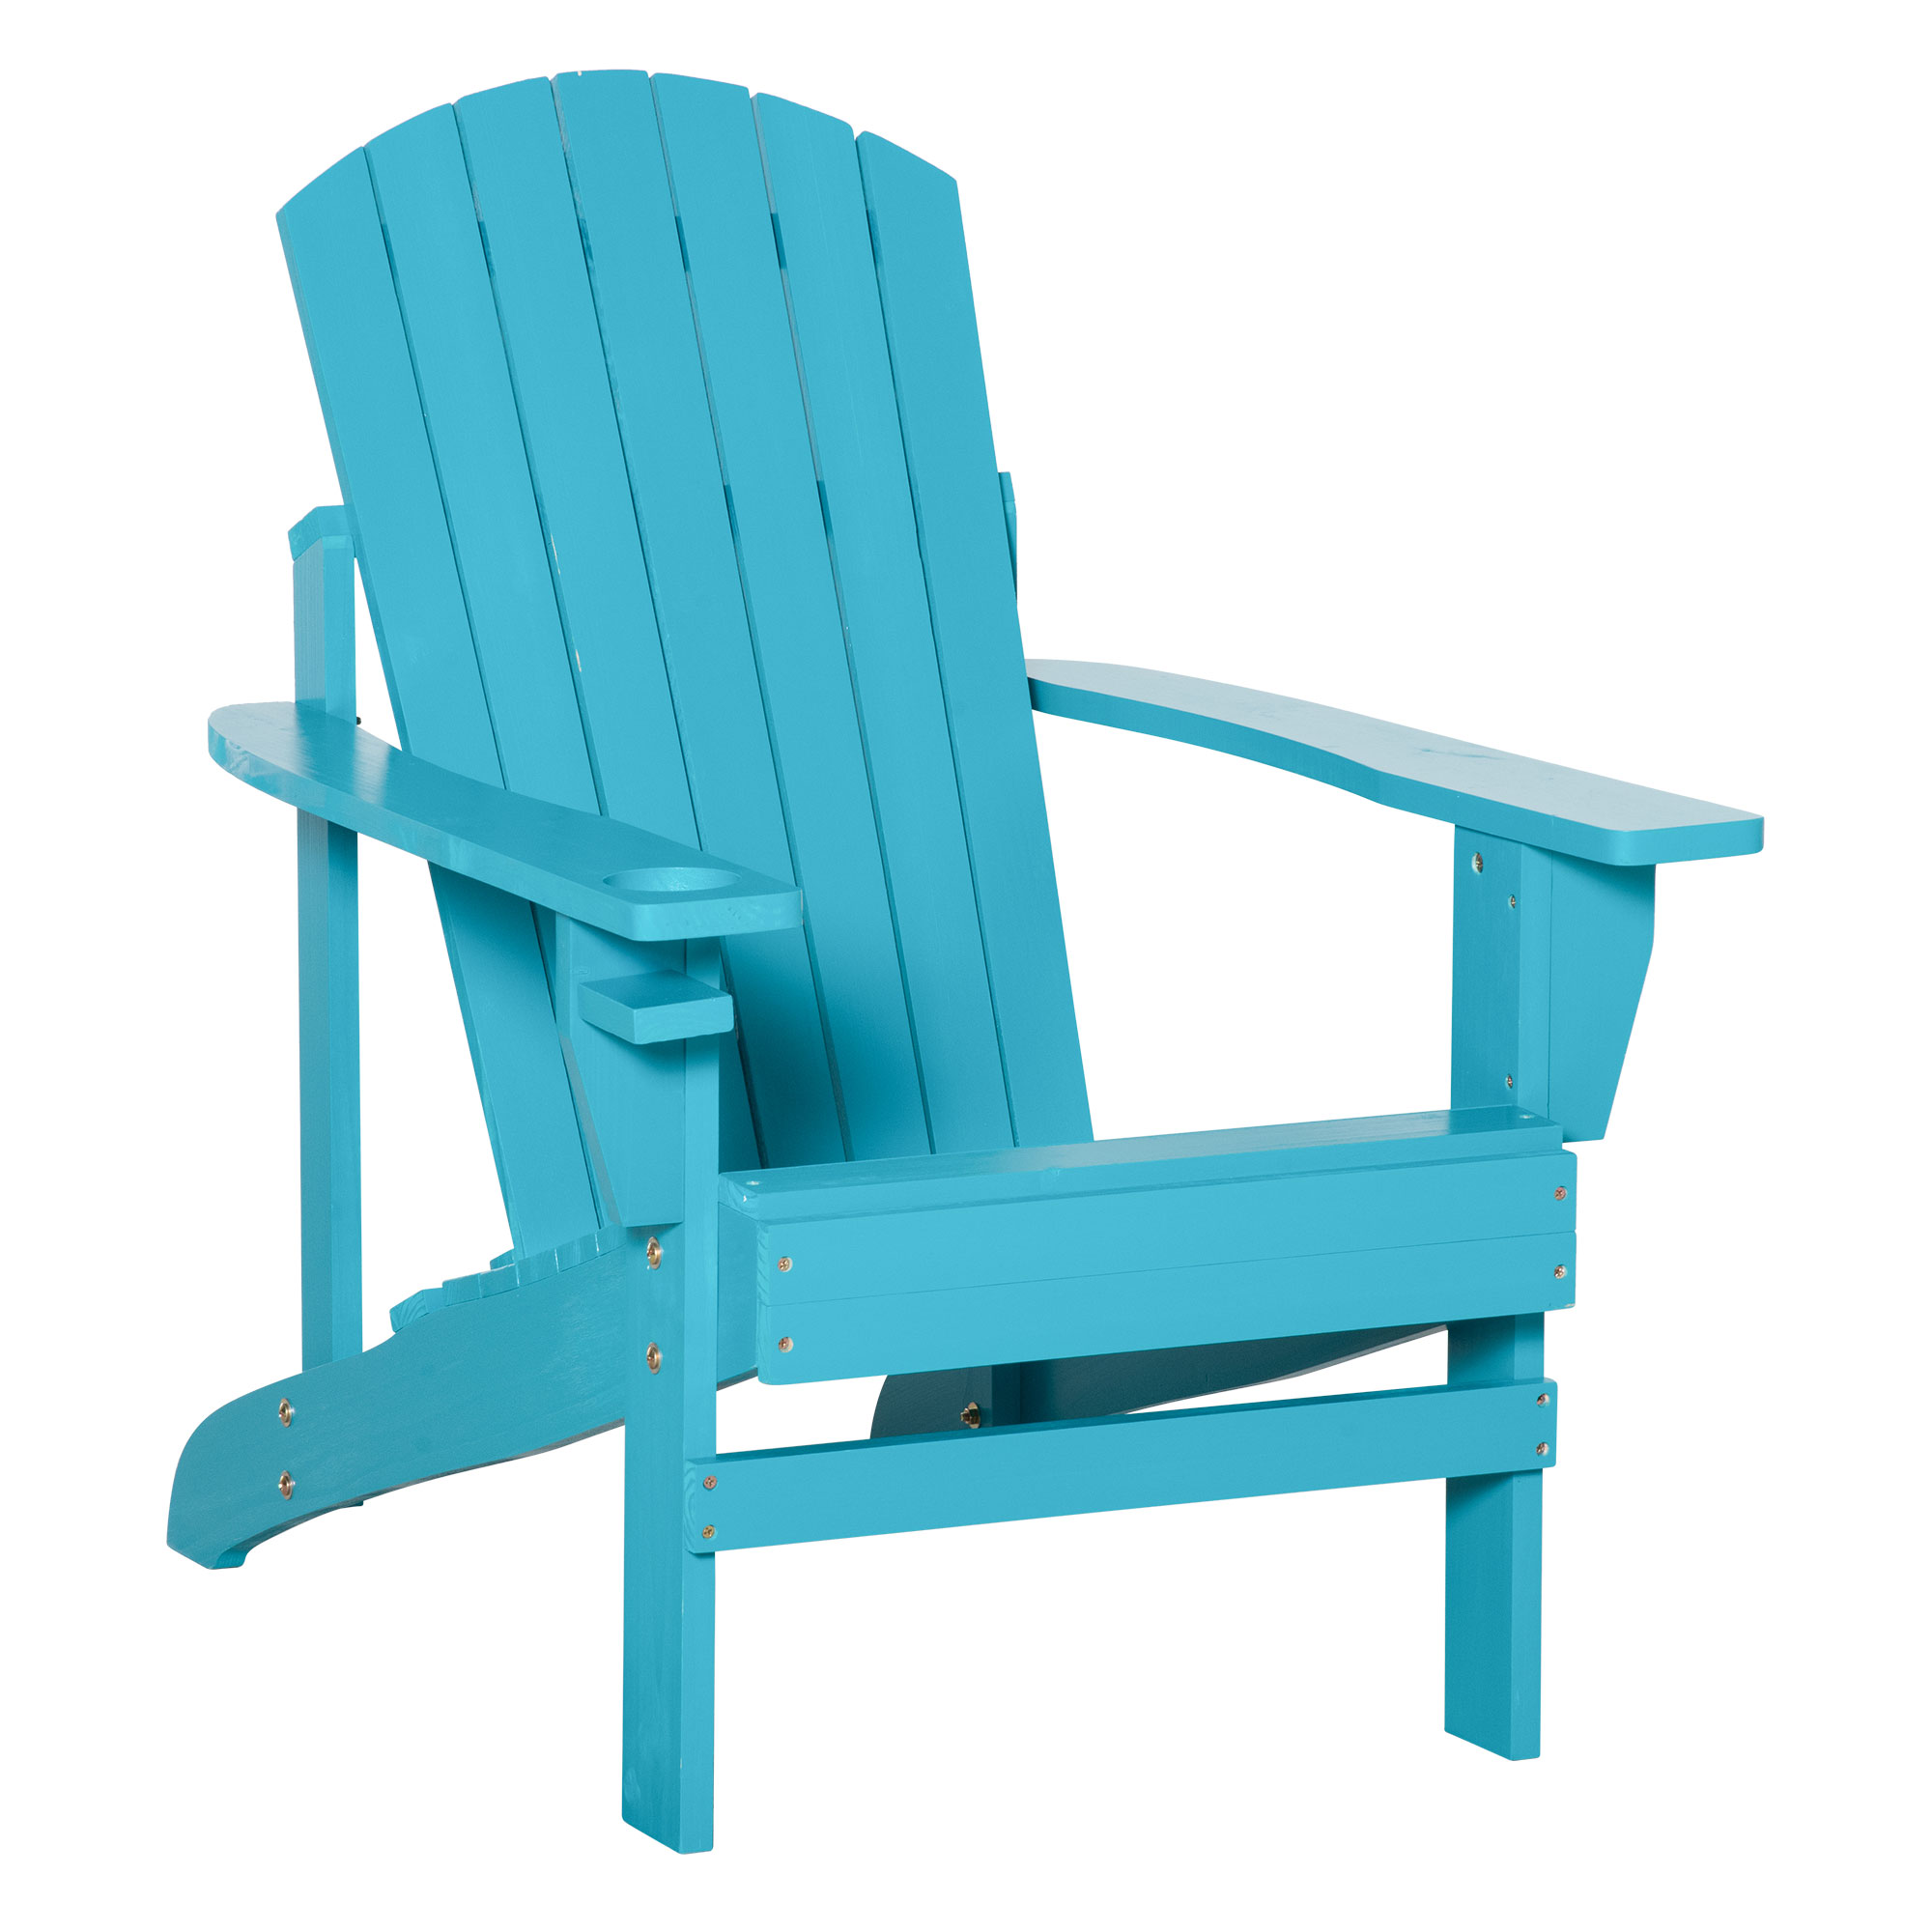 Outsunny Wood Adirondack Chair, Wooden Outdoor & Patio Seating, Sky Blue - image 1 of 9